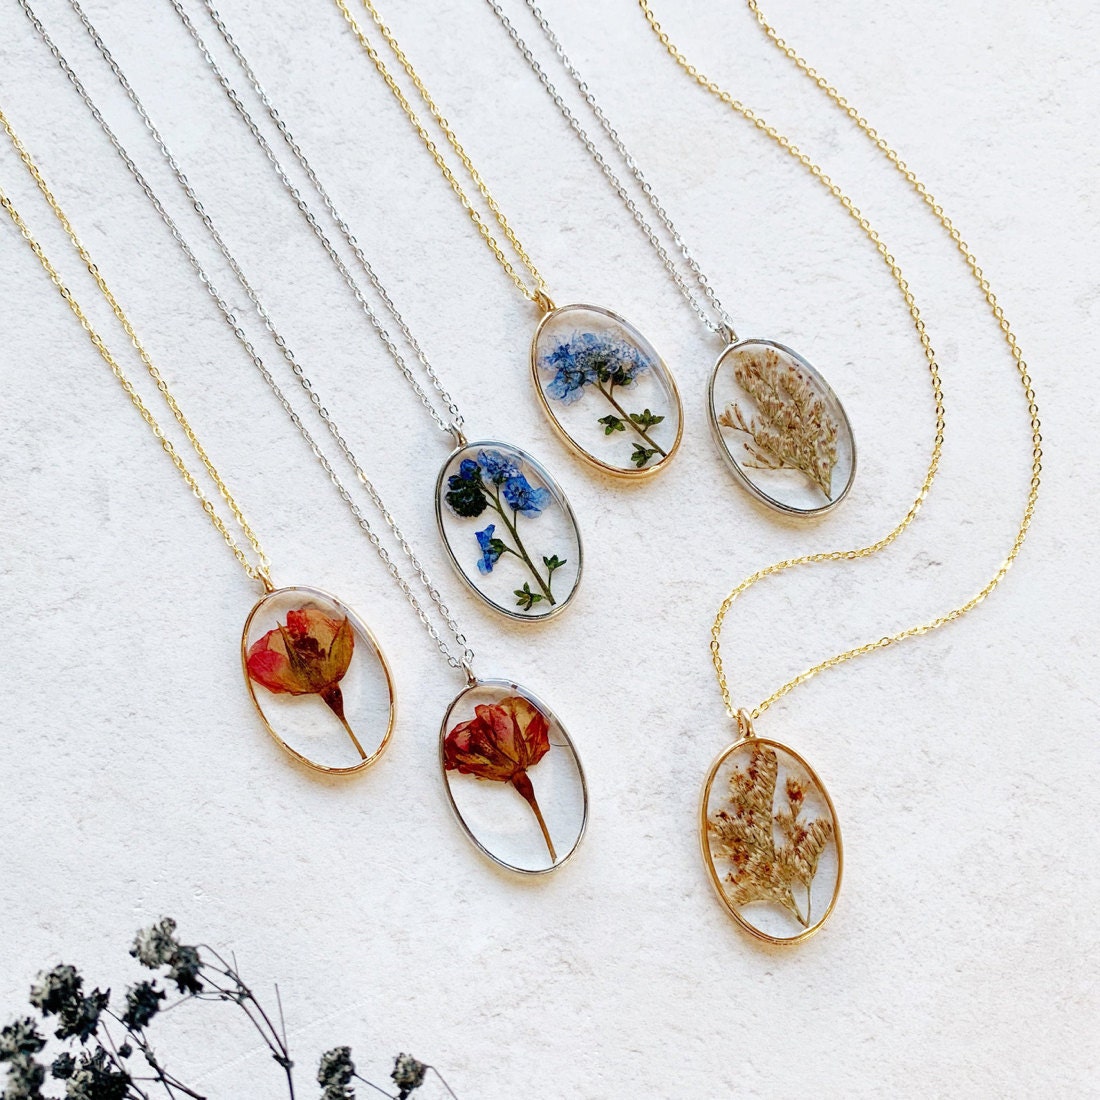 A collection of pressed-flower necklaces from Electric Eccentricity